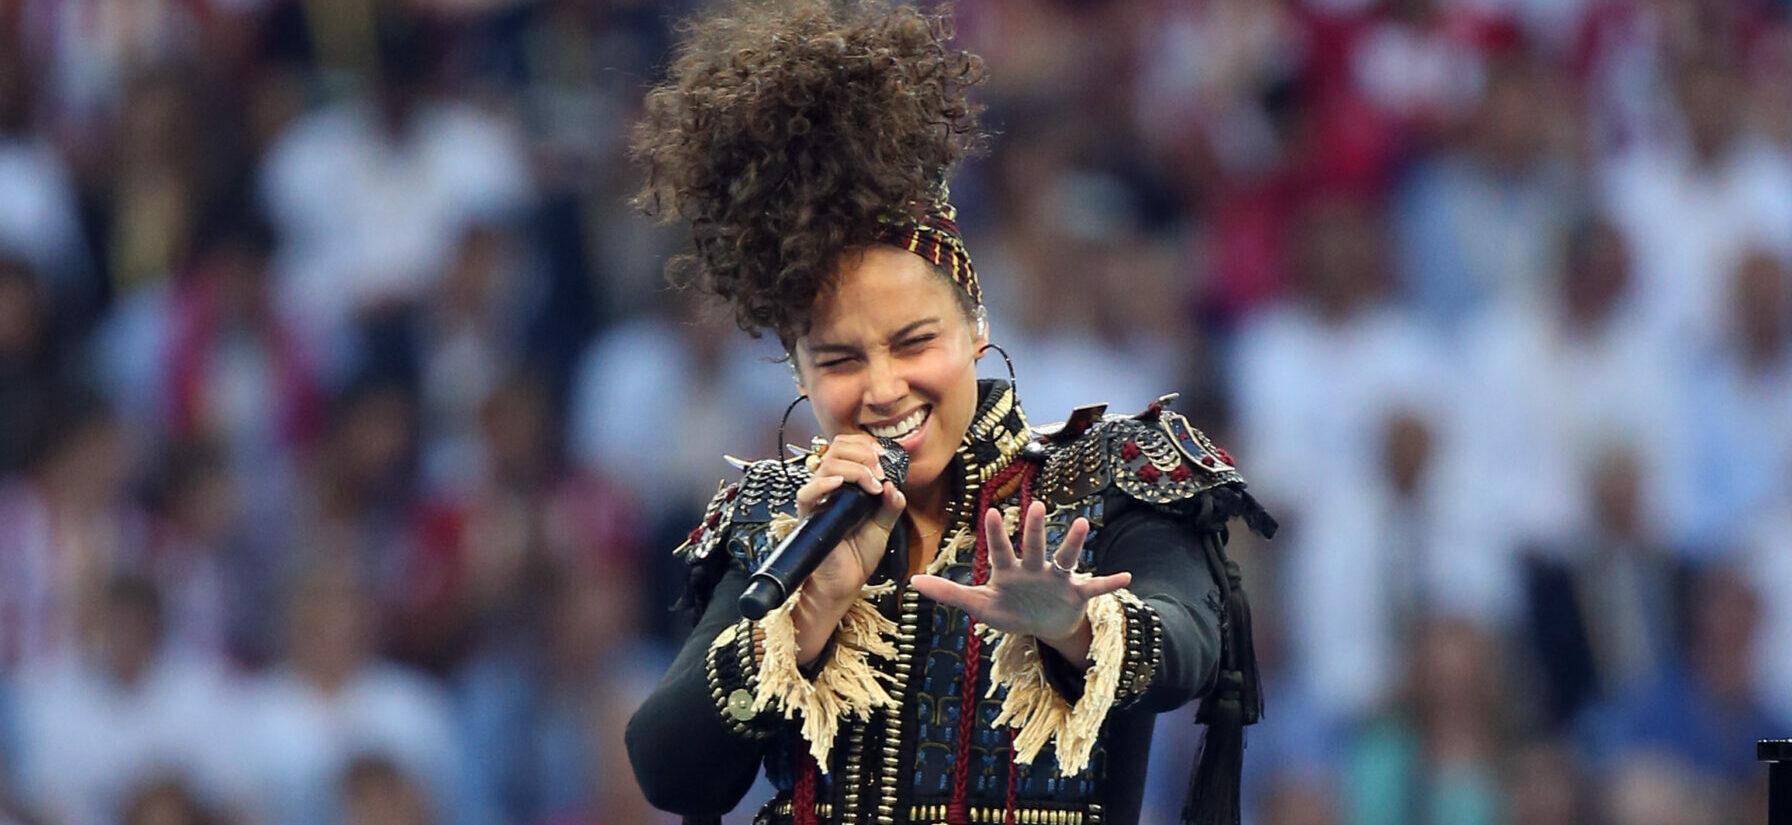 Alicia Keys during her performance at the 2016 UEFA Champions League Final Real Madrid v Atletico Madrid May 28th